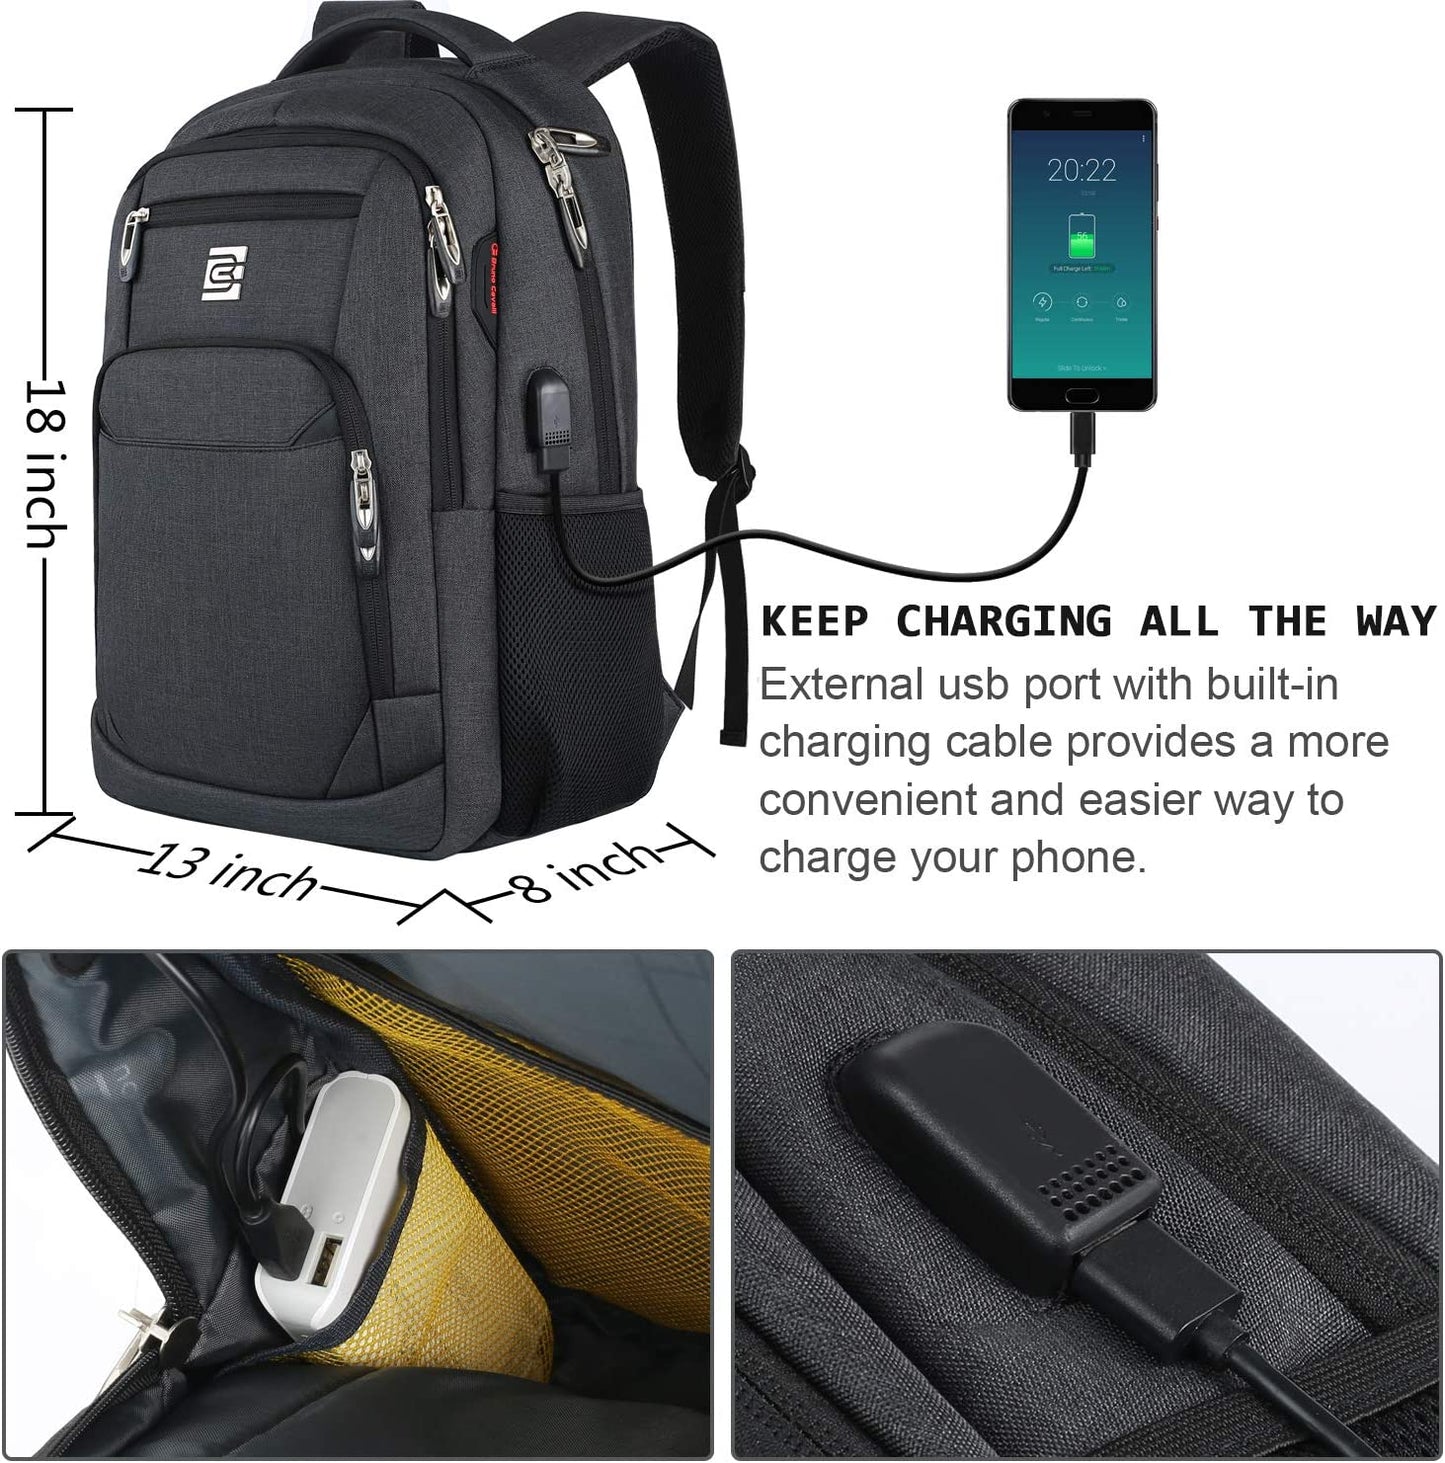 Laptop Backpack,Business Travel anti Theft Slim Durable Laptops Backpack with USB Charging Port,Water Resistant College School Computer Bag for Women & Men Fits 15.6 Inch Laptop and Notebook - Black